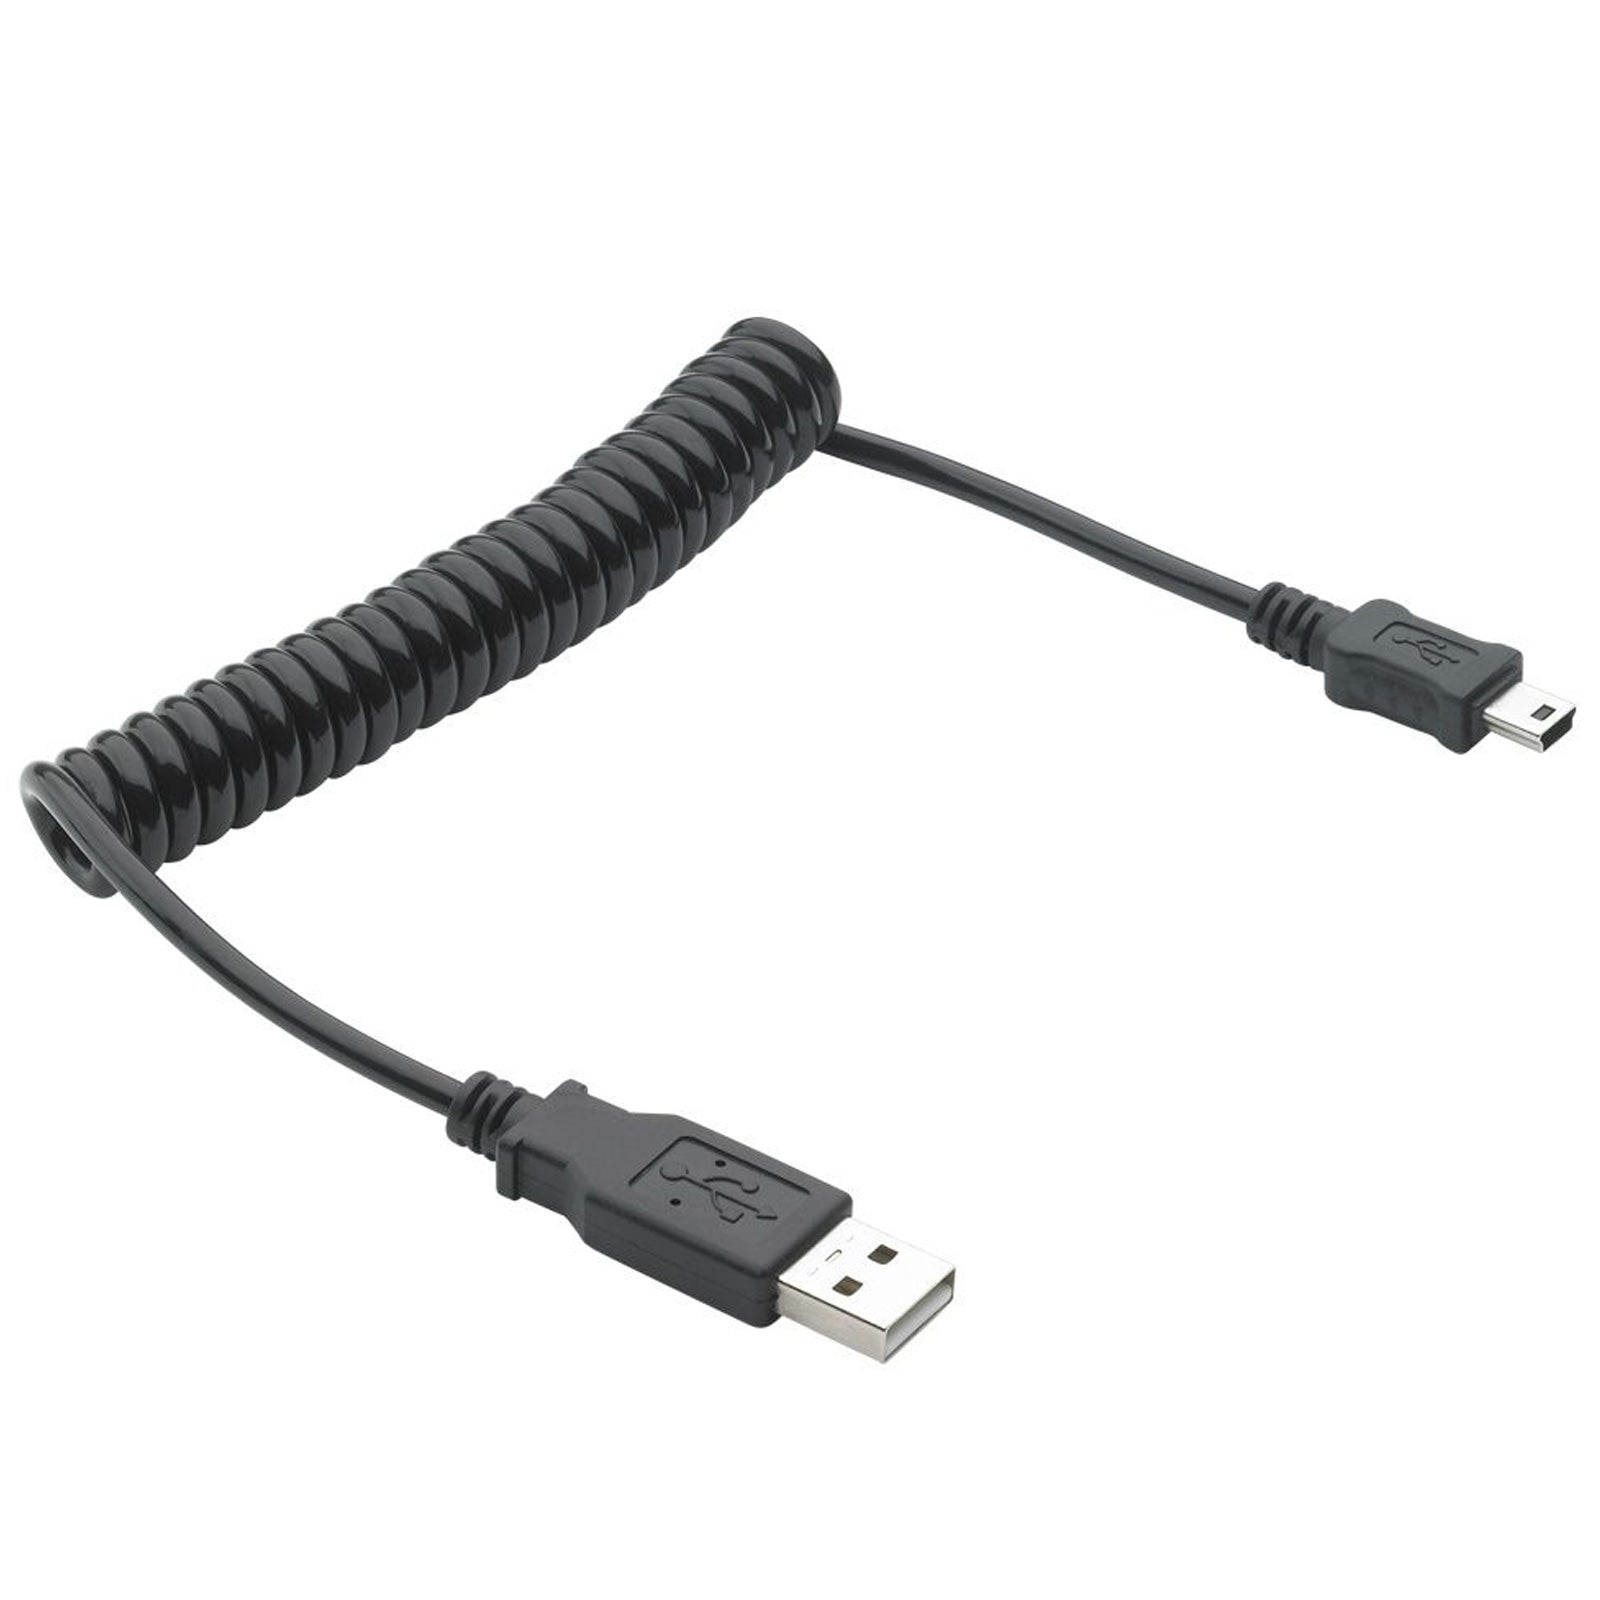 Motocaddy USB Phone Cables